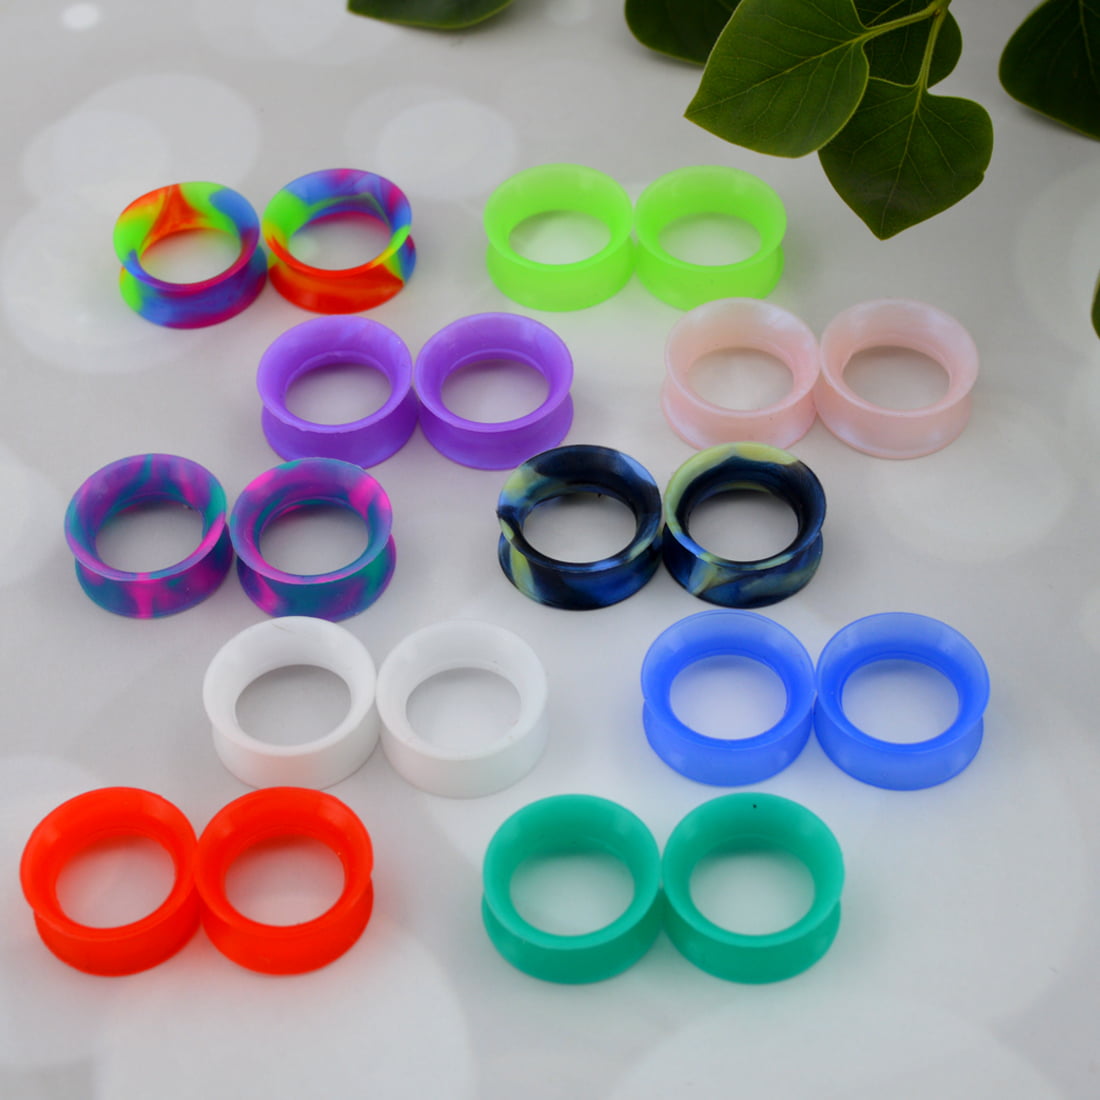 OUFER 20PCS Soft Silicone Ear Gauges Flesh Tunnels Plugs Stretchers Expander Double Flared Flesh Tunnels Ear Piercing Jewelry 